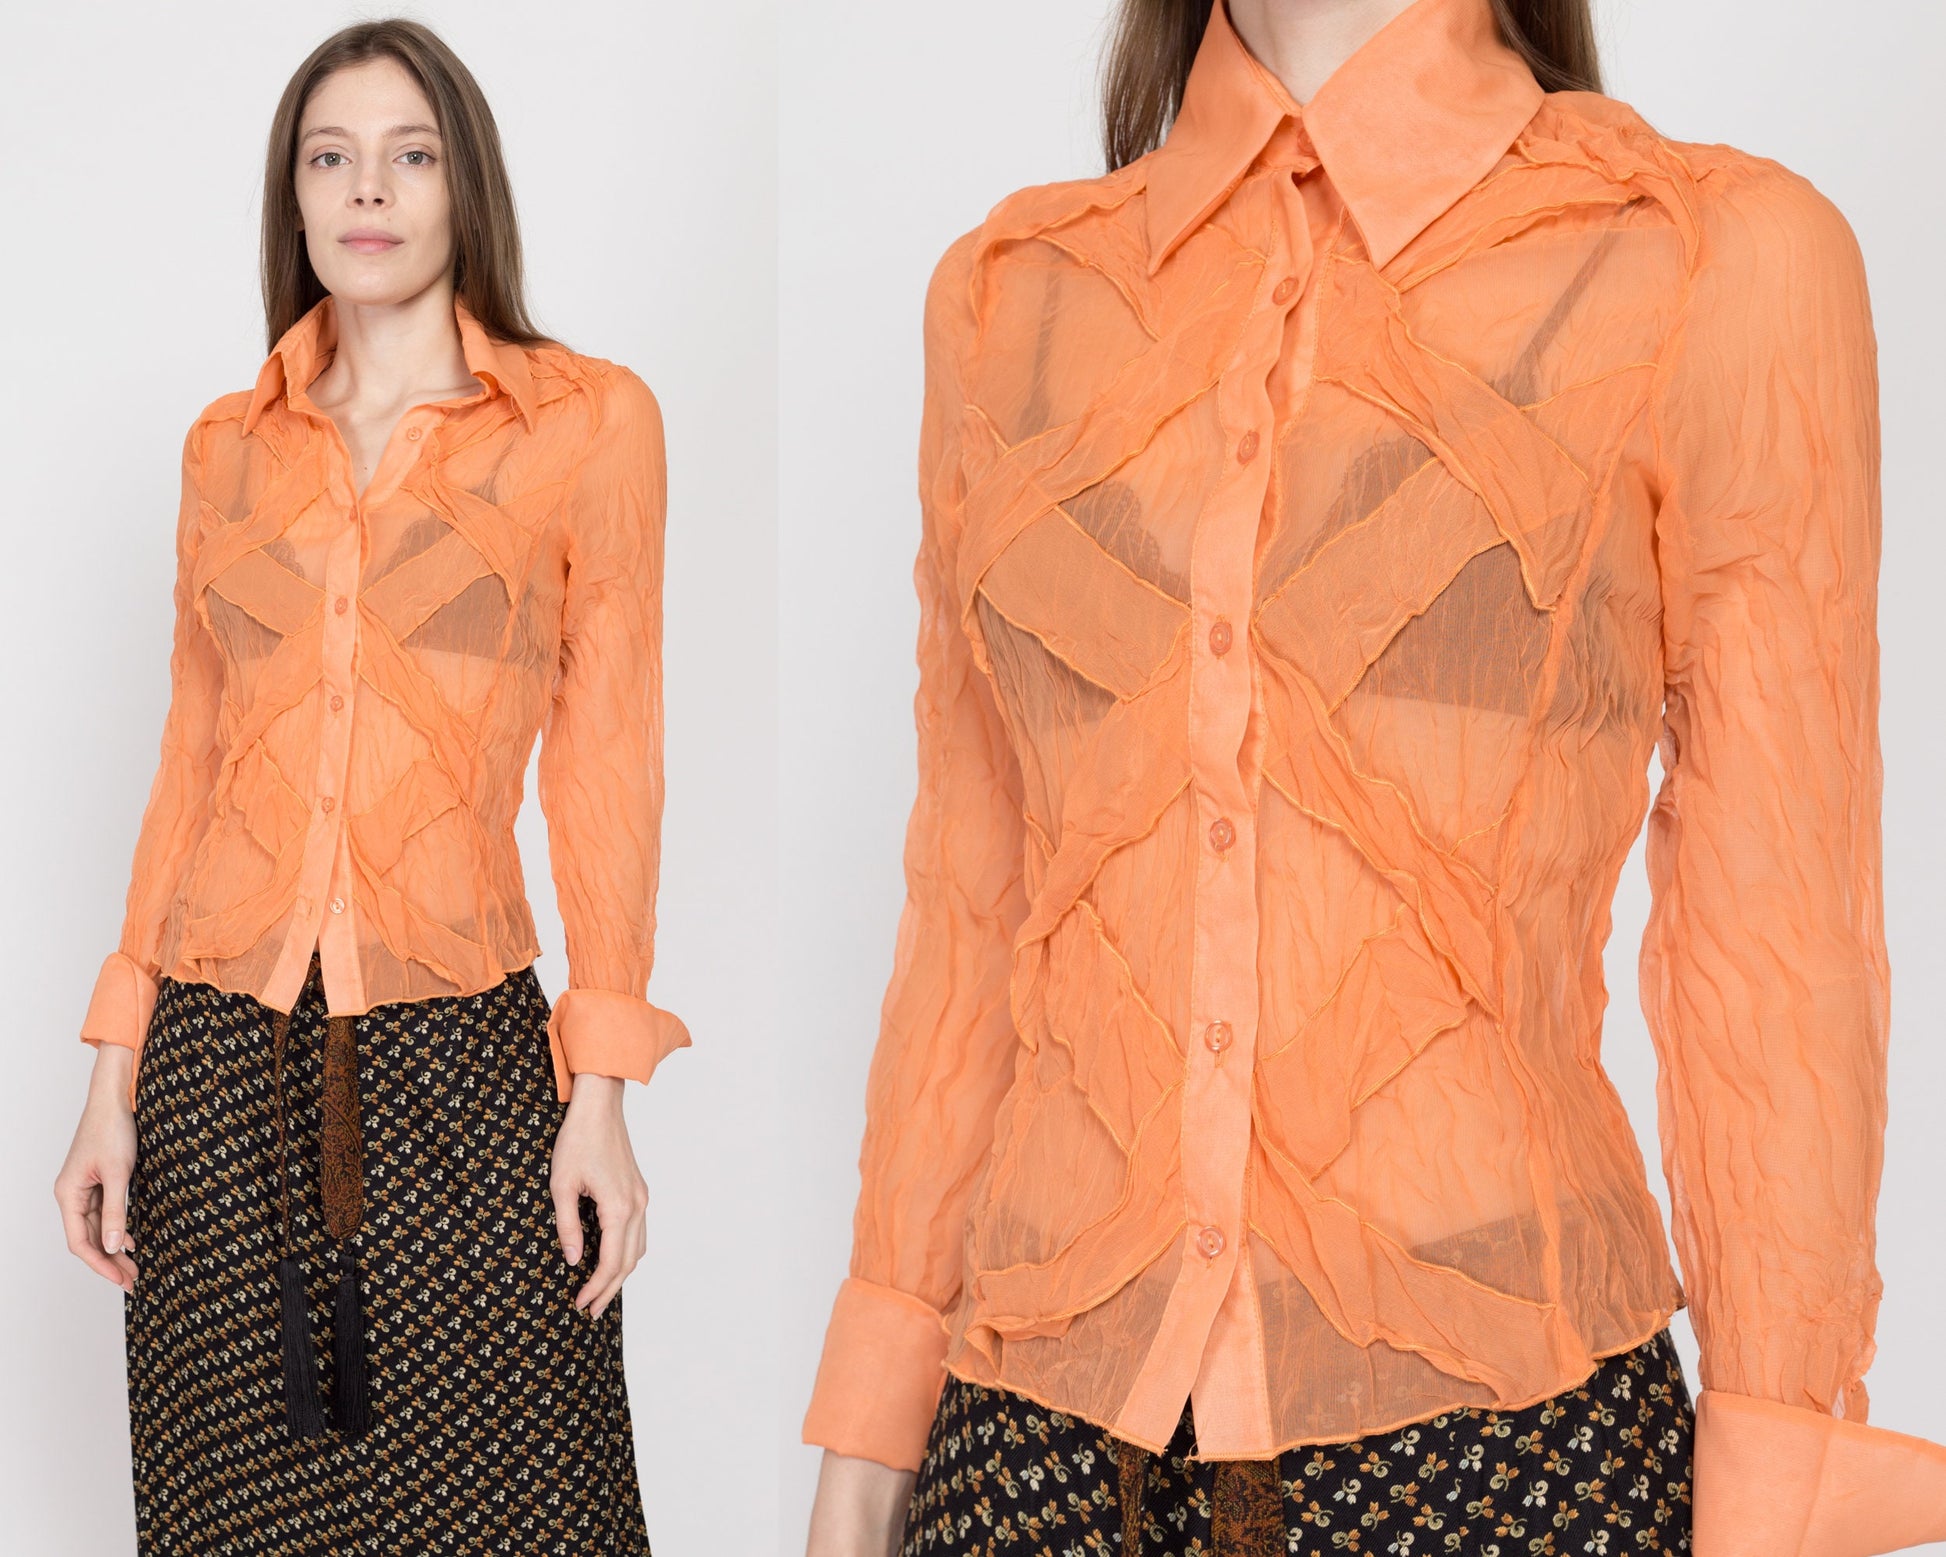 Small 90s Y2K Orange Sheer Crinkle Textured Blouse | Vintage Long Sleeve Collared Button Up Top